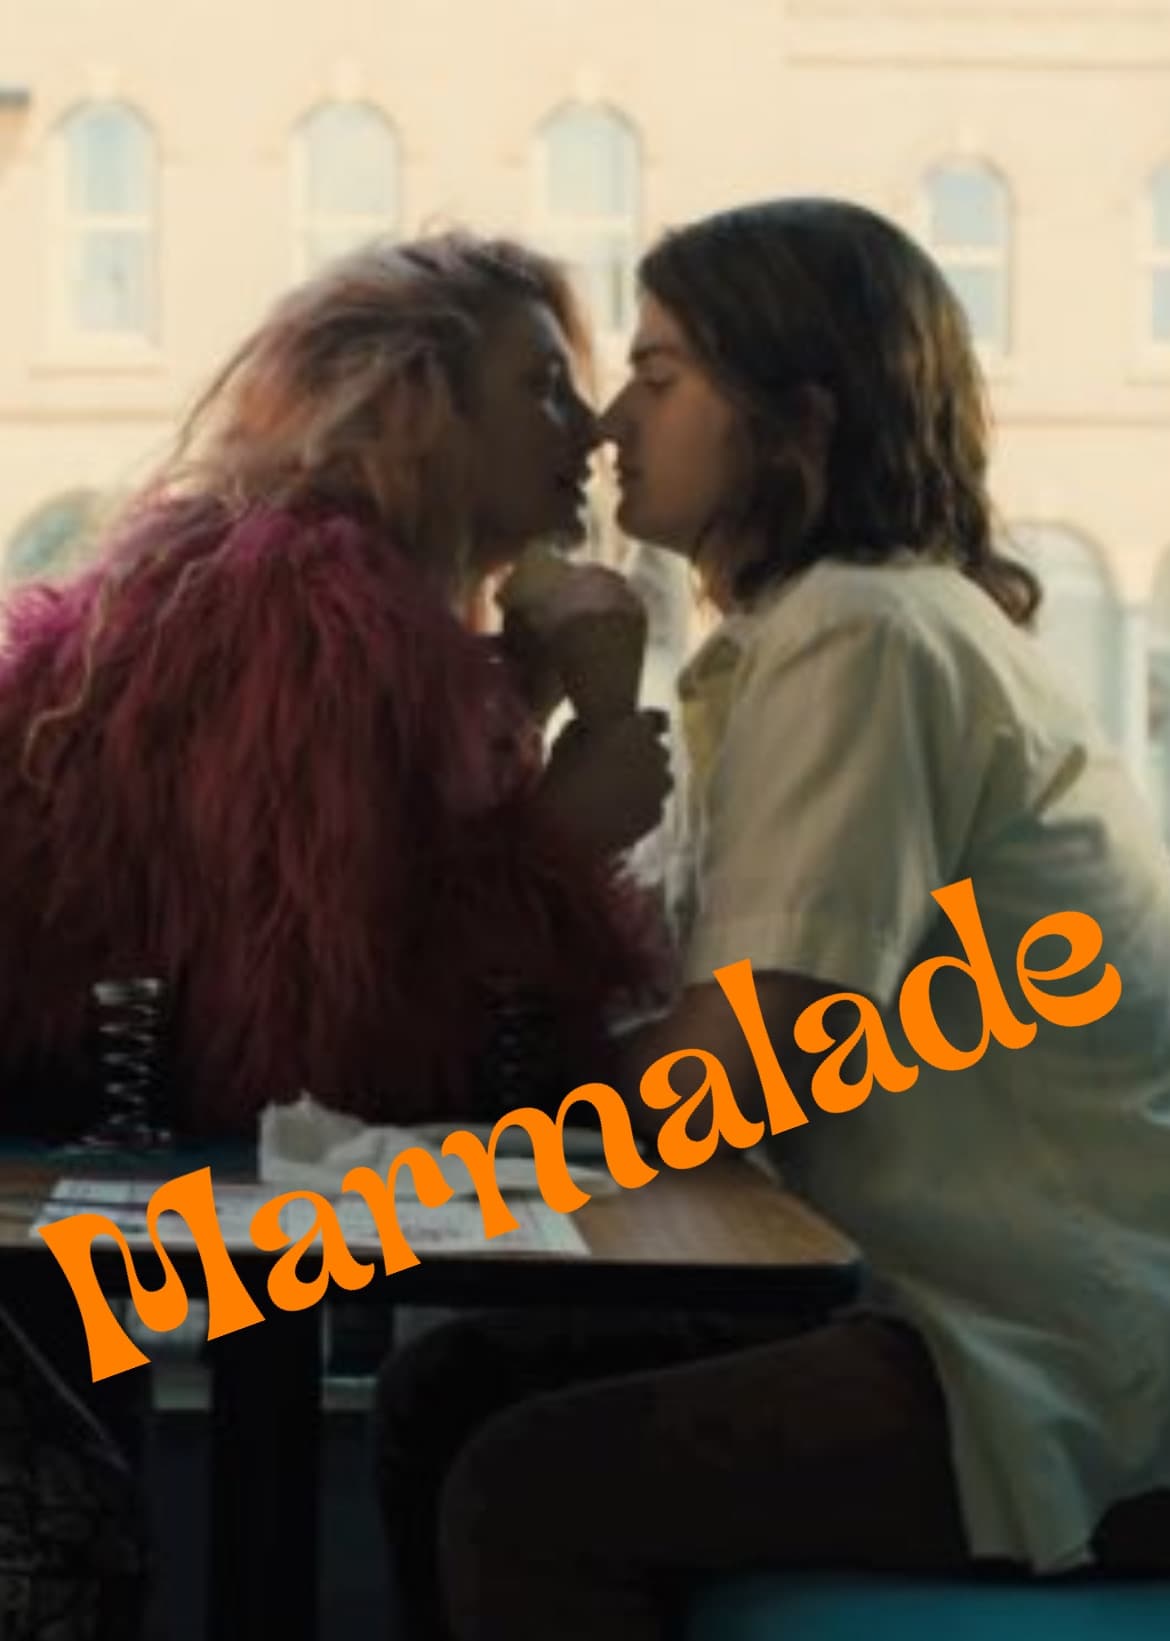 Poster for the movie "Marmalade"